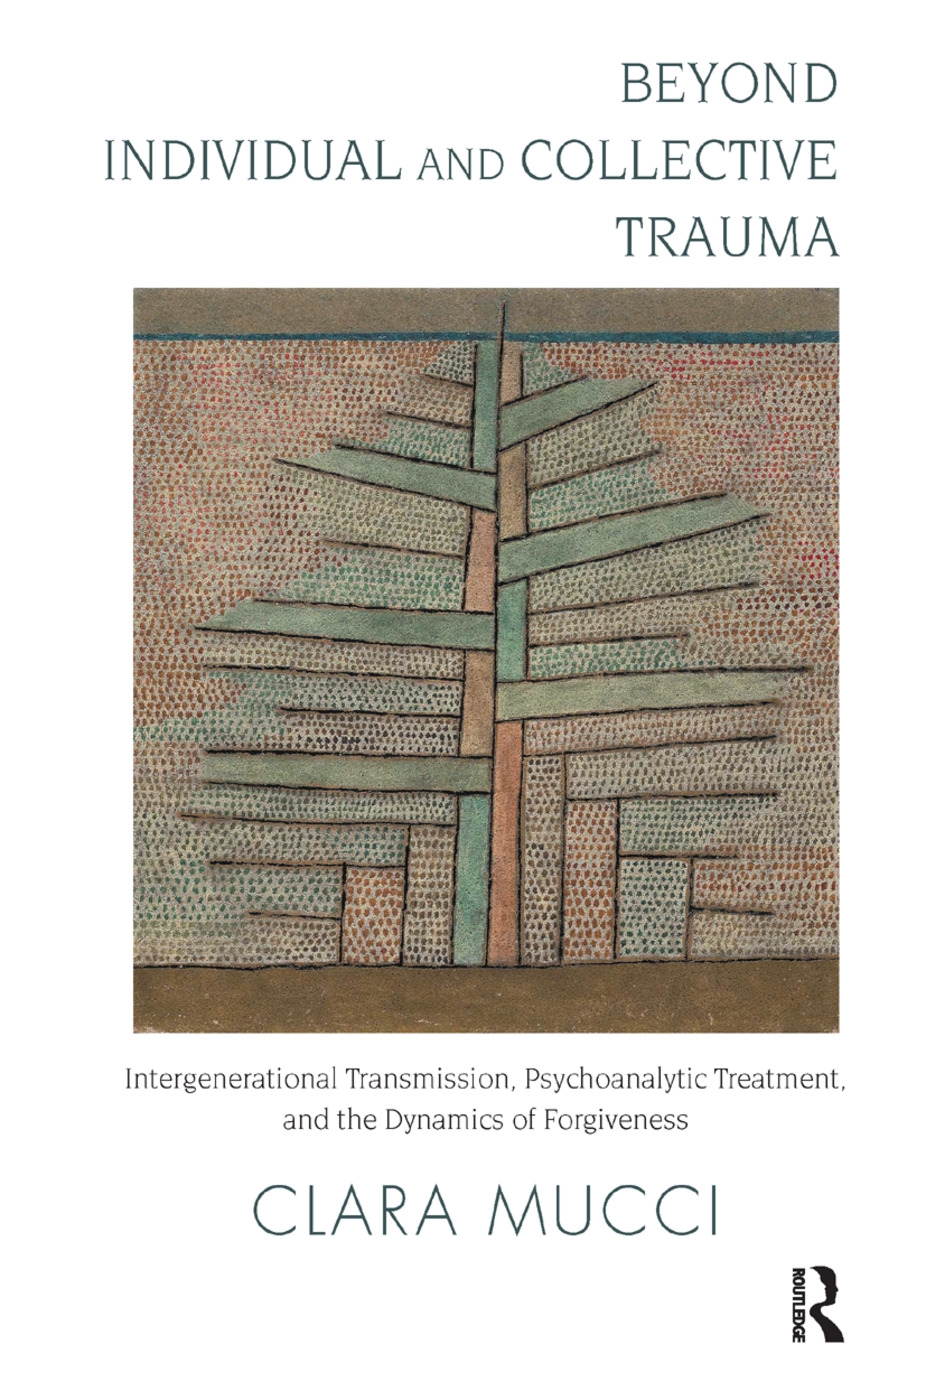 Beyond Individual and Collective Trauma: Intergenerational Transmission, Psychoanalytic Treatment, and the Dynamics of Forgivene